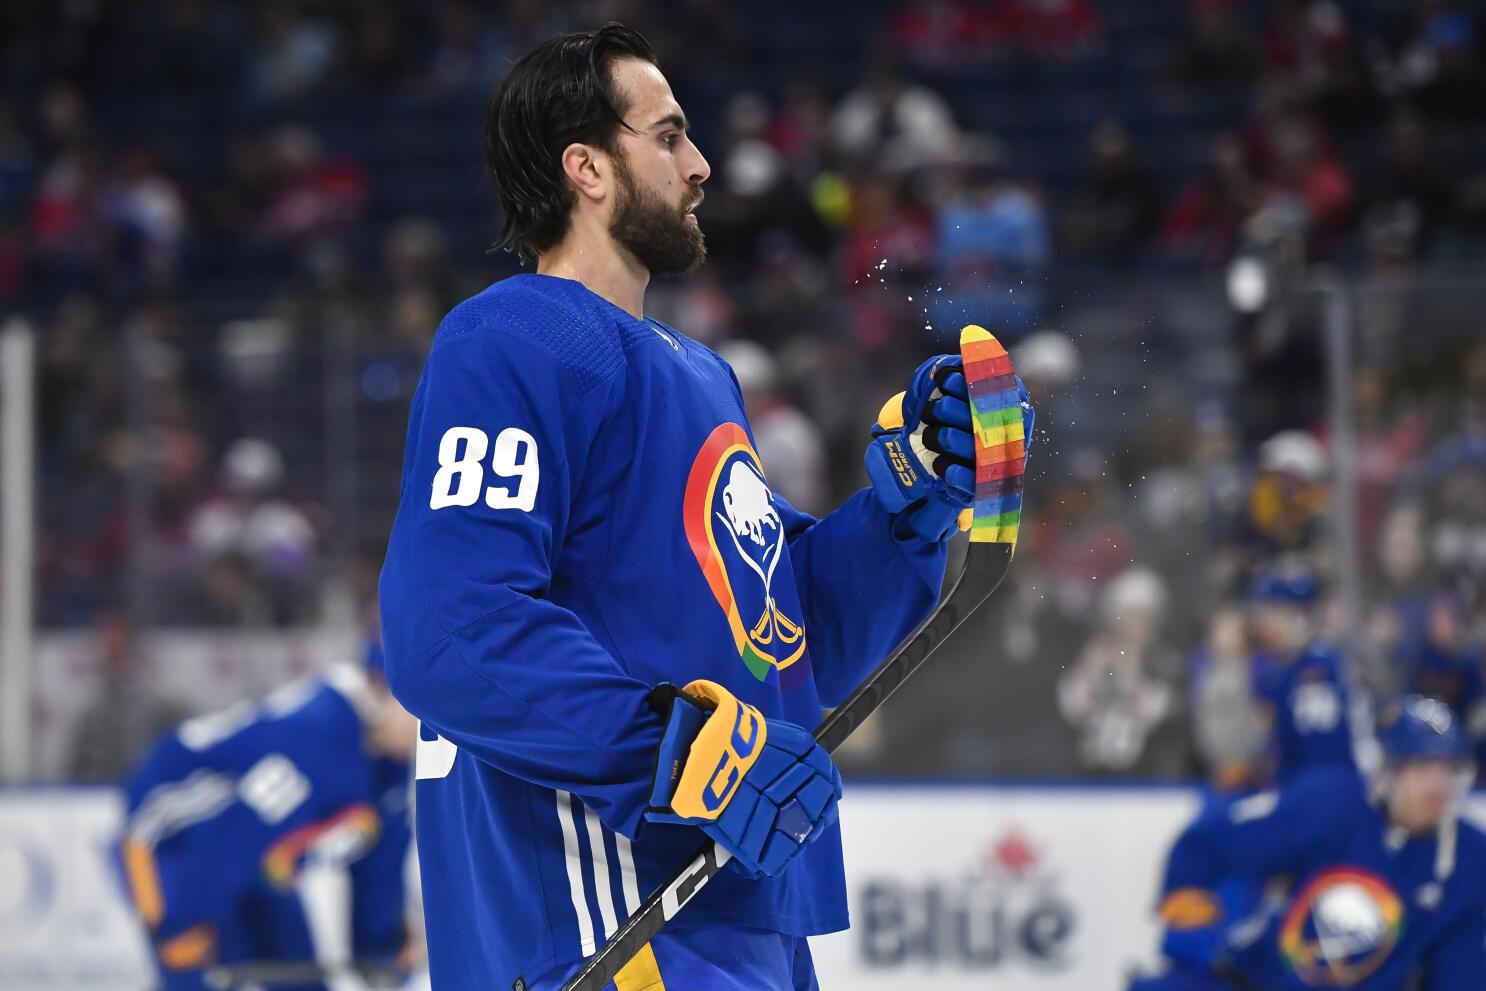 NHL rescinds ban on rainbow-colored Pride tape, allowing players to use it  on the ice this season - NBC Sports